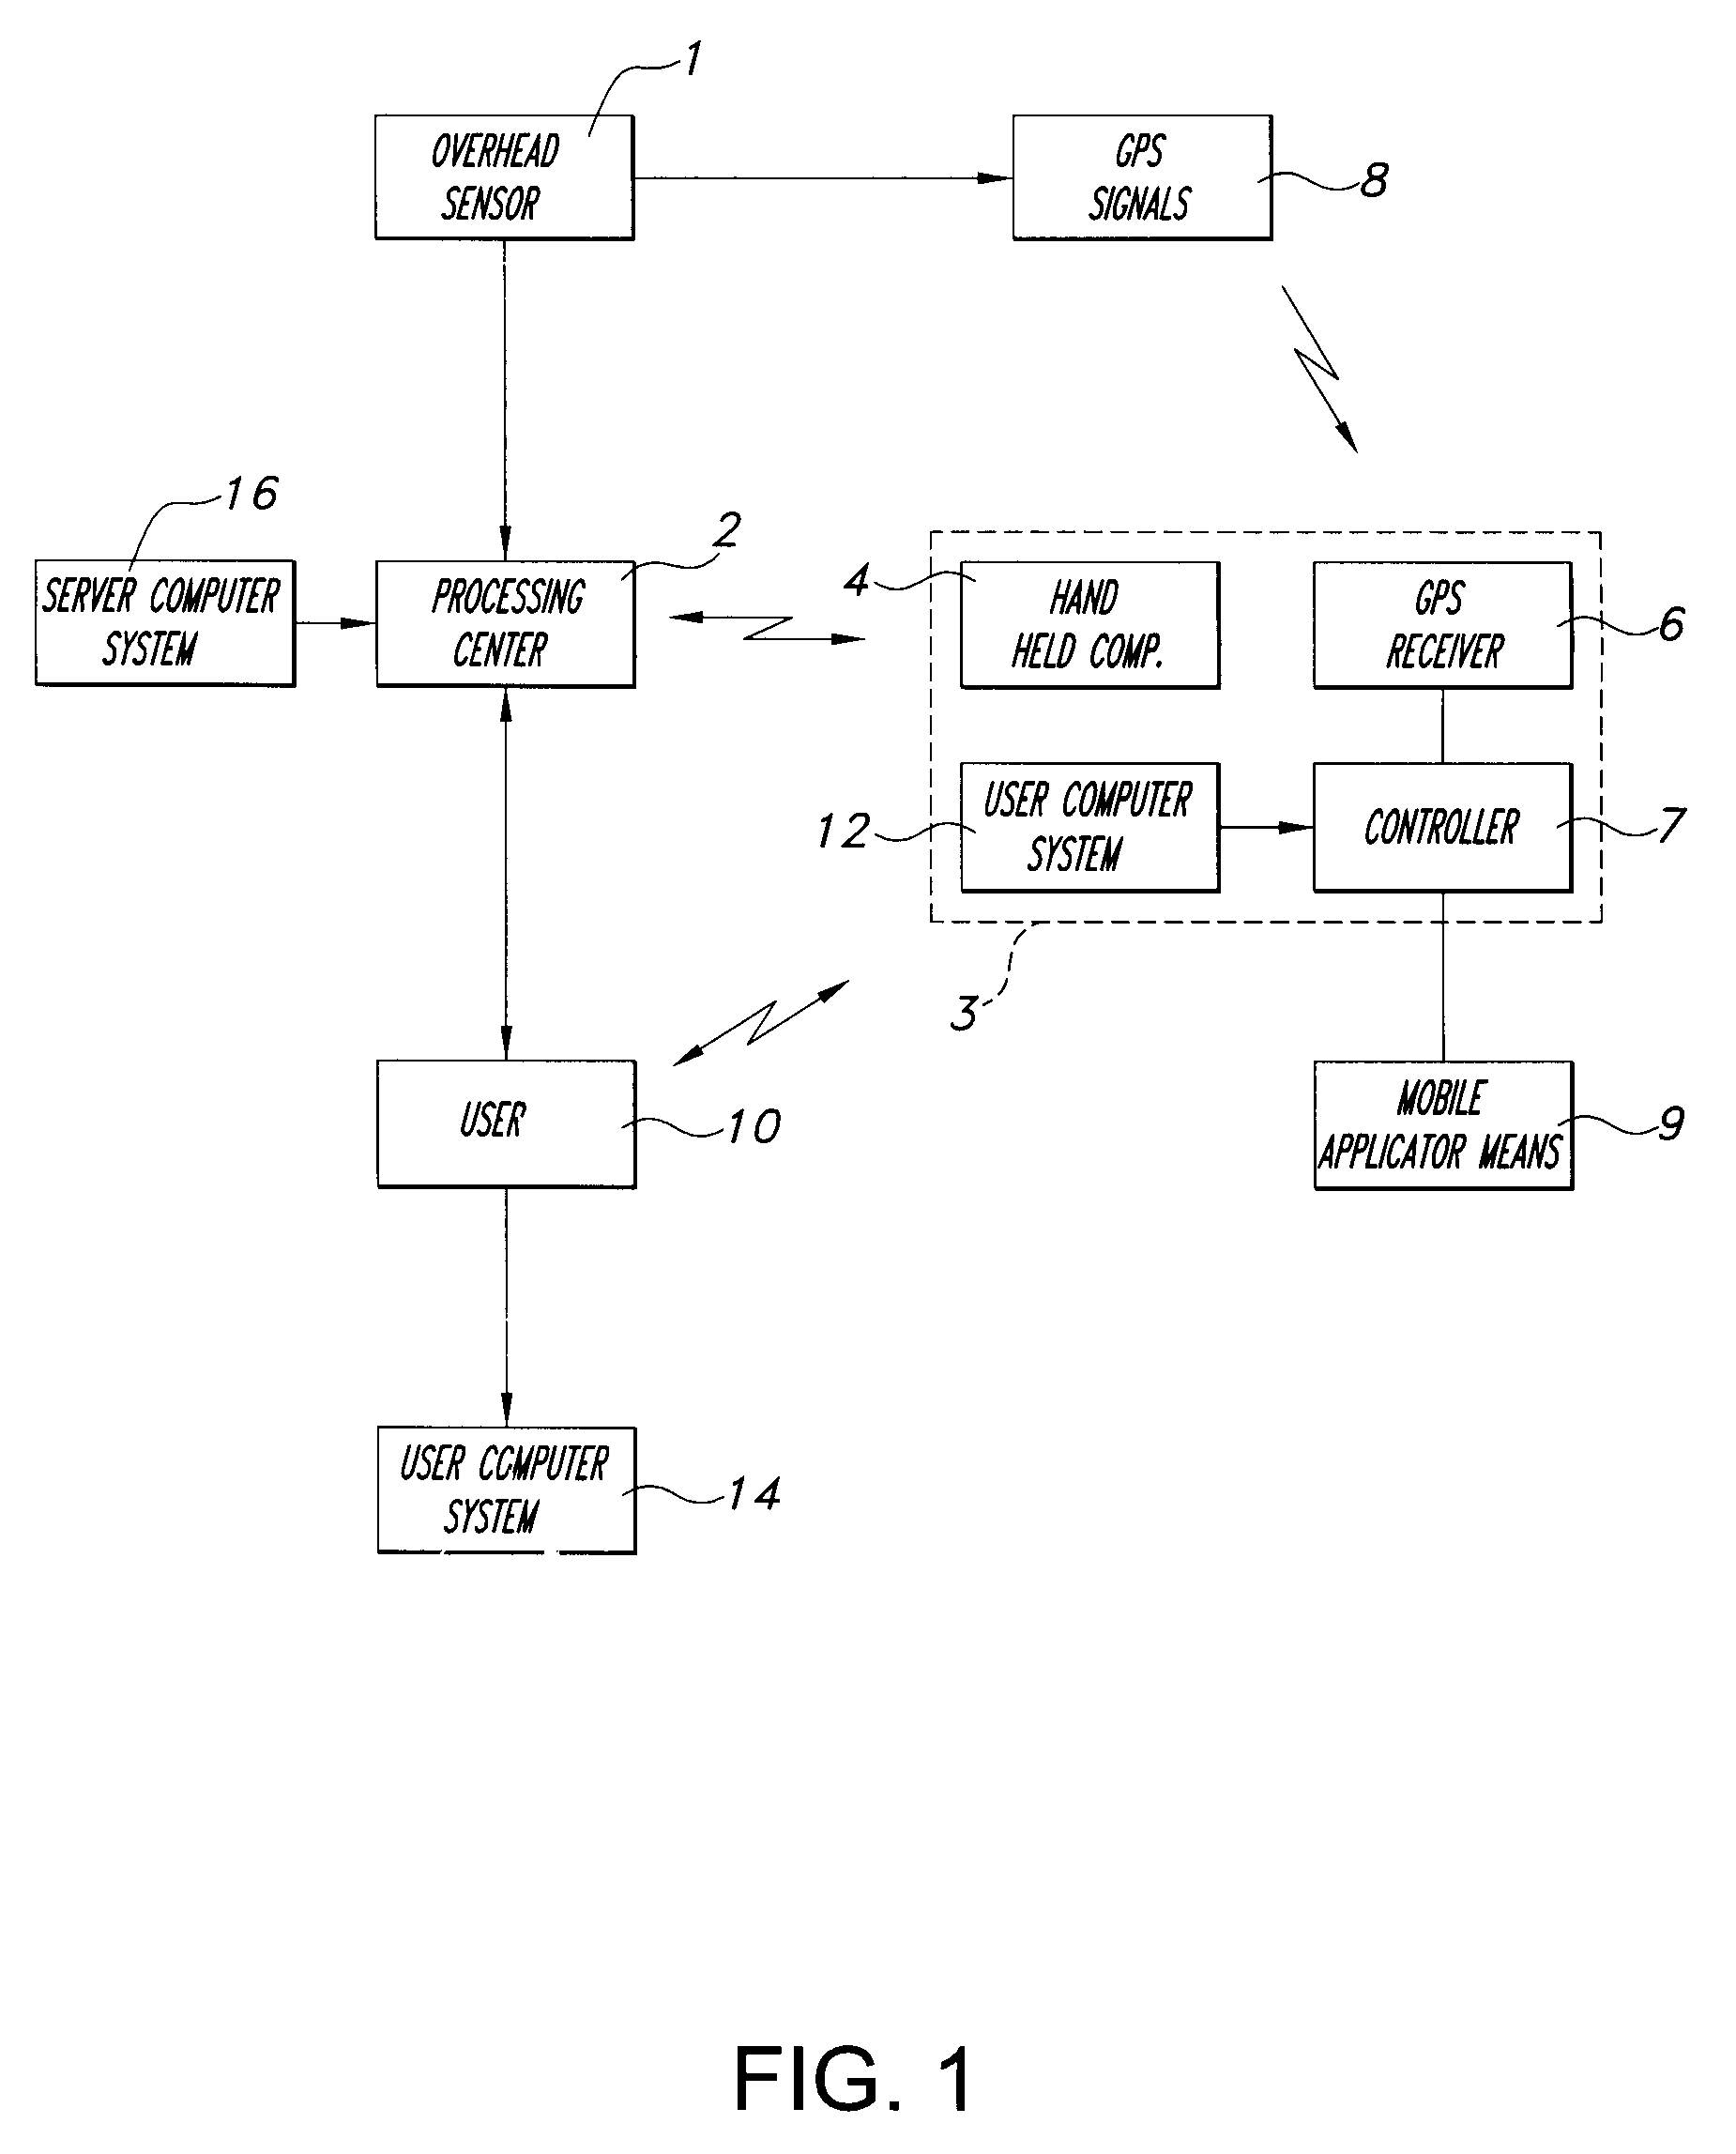 [method and system for spatially variable rate application of agricultural chemicals based on remotely sensed vegetation data]